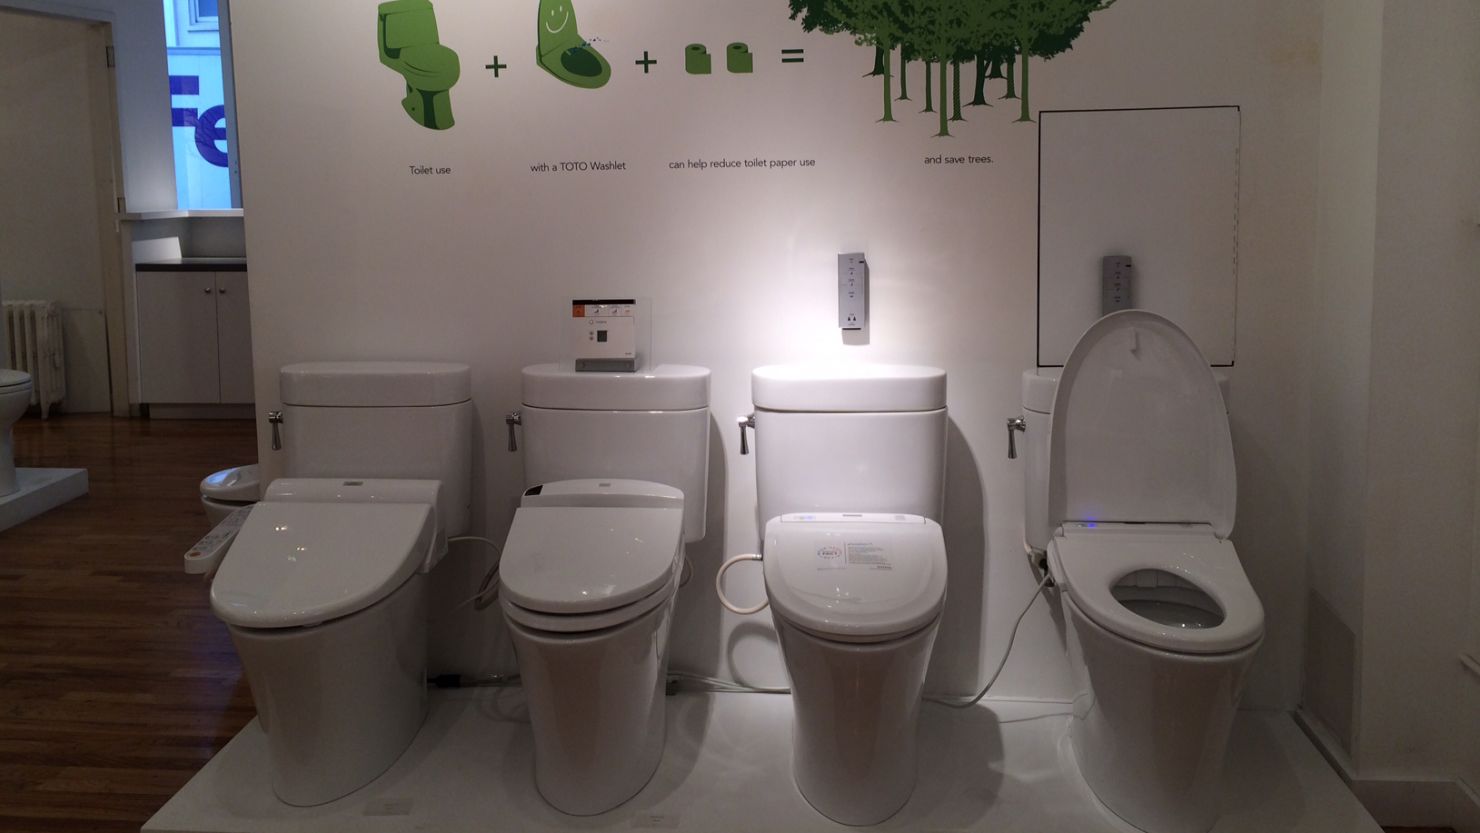 This Feb. 21, 2014, photo shows TOTO Washlet high-tech toilets in the TOTO showroom in the Soho neighborhood of New York.